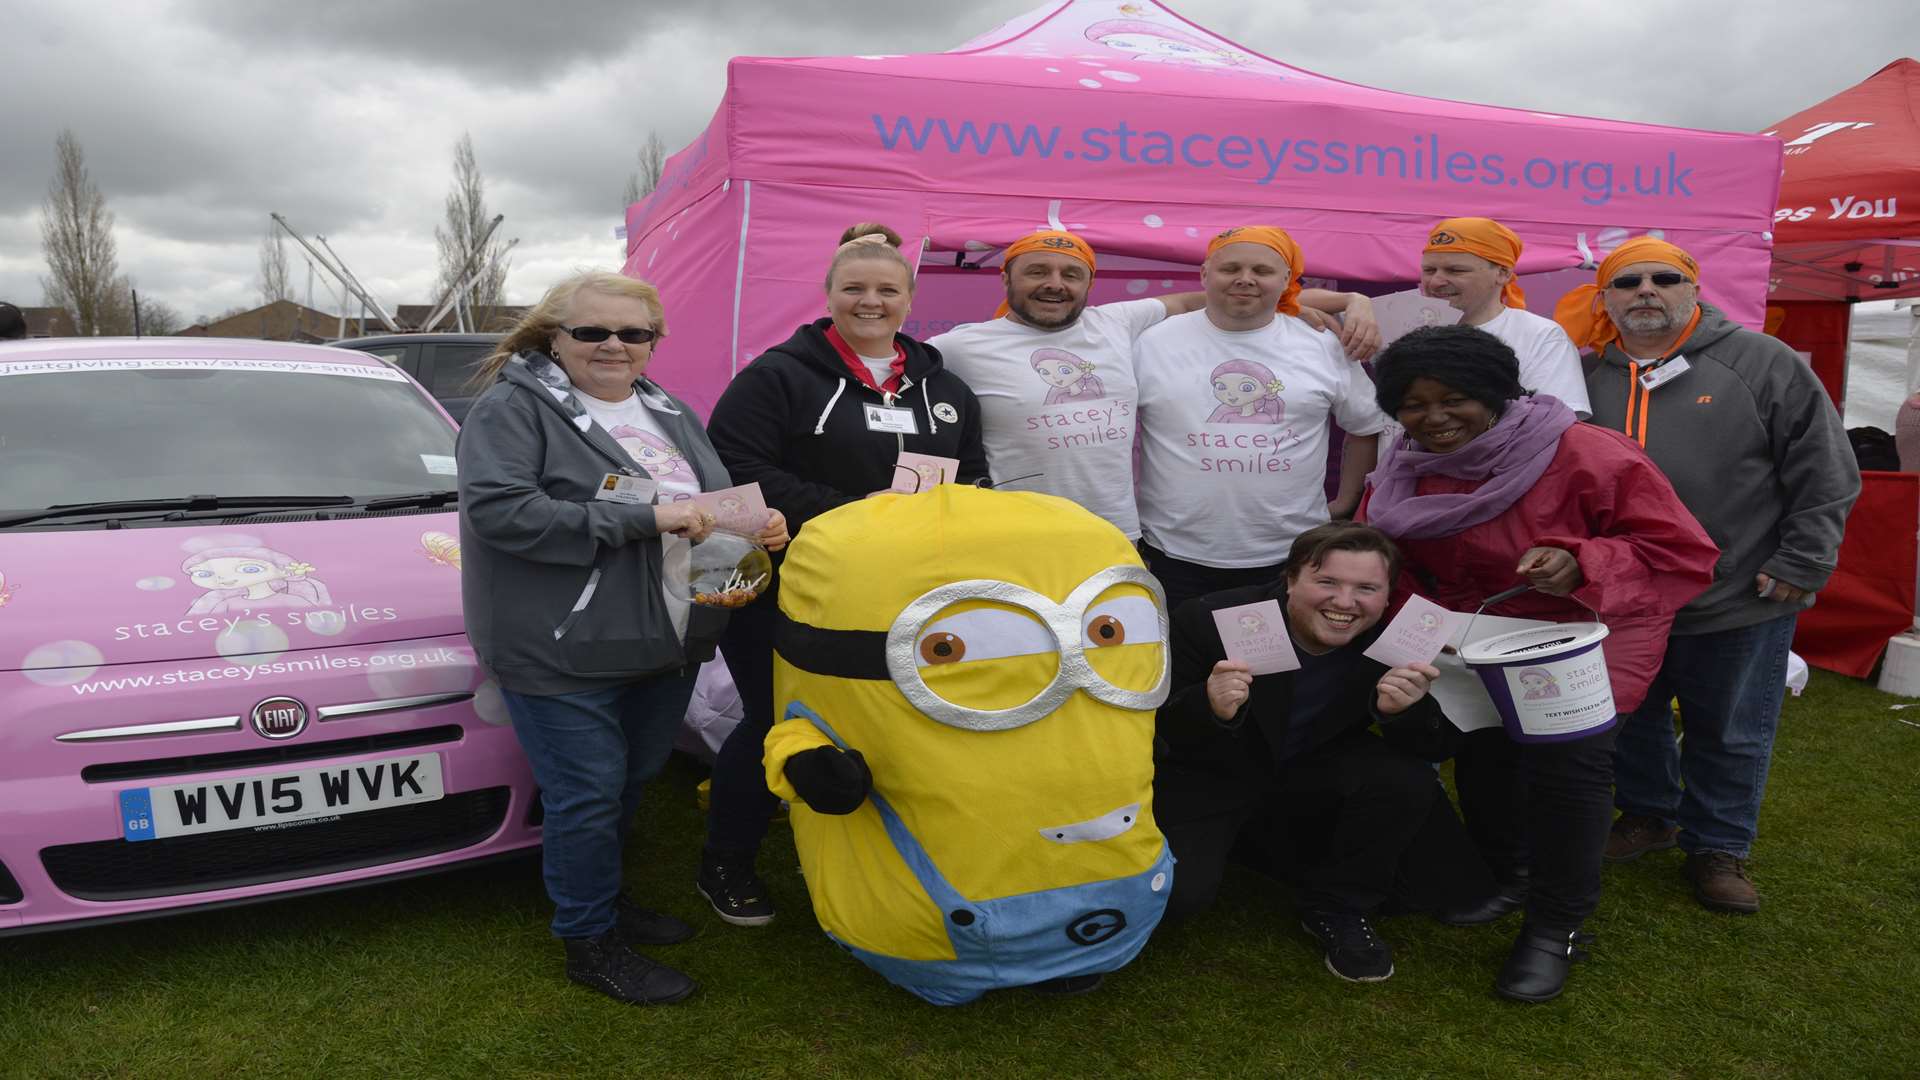 The Stacey's Smiles team at the Vaisakhi festival on their first public appearance